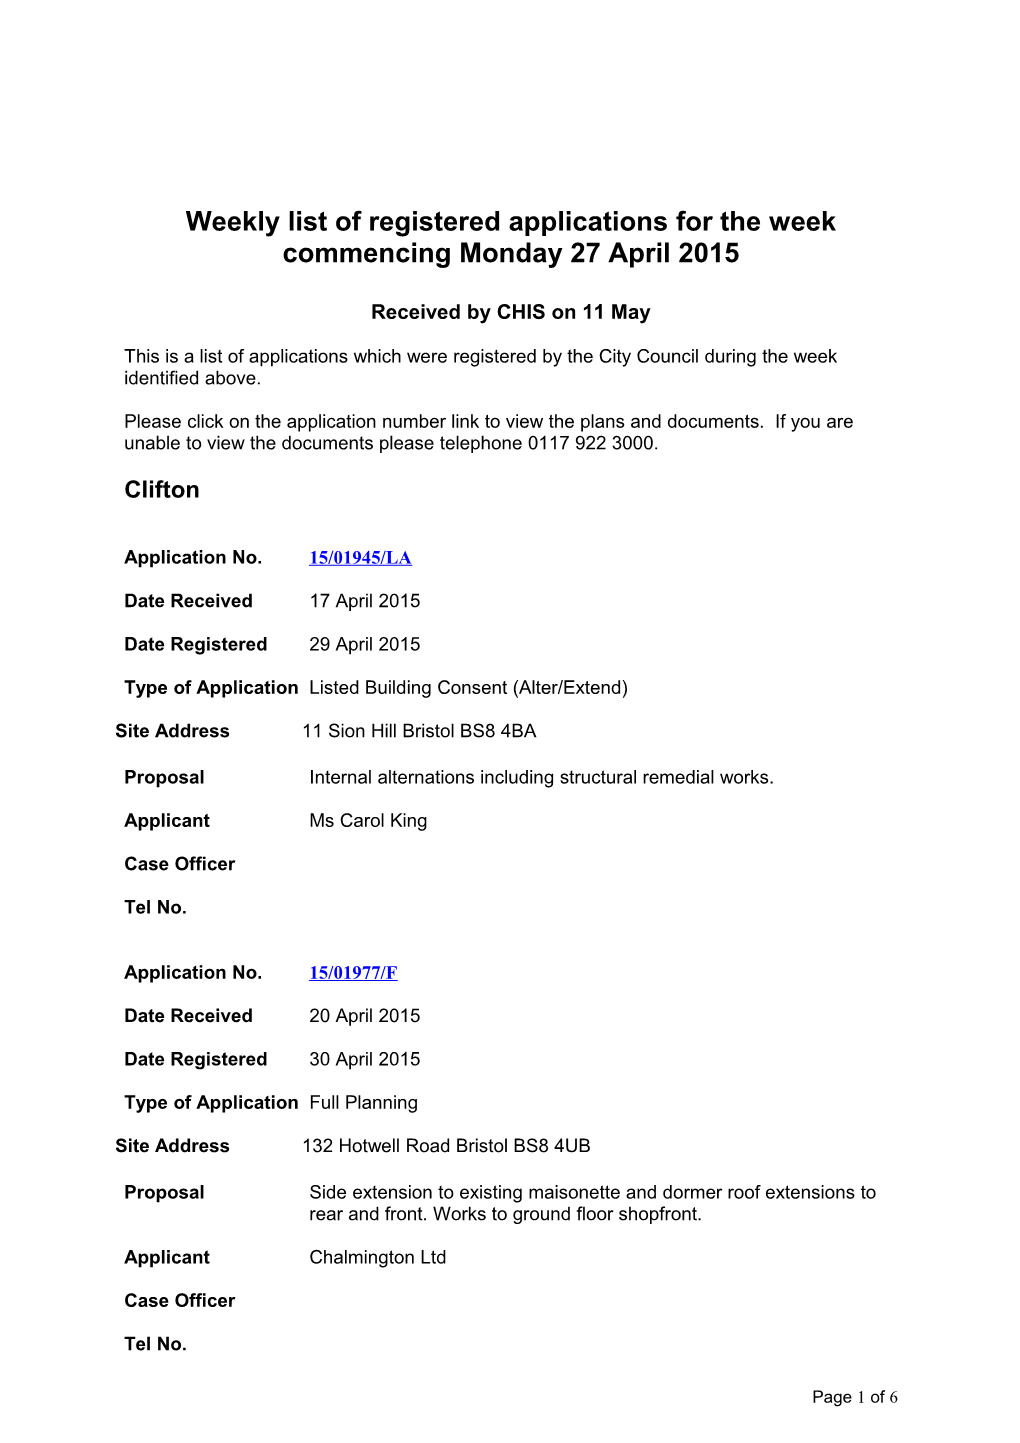 Weekly List of Registered Applications for the Week Commencing Monday 27 April 2015